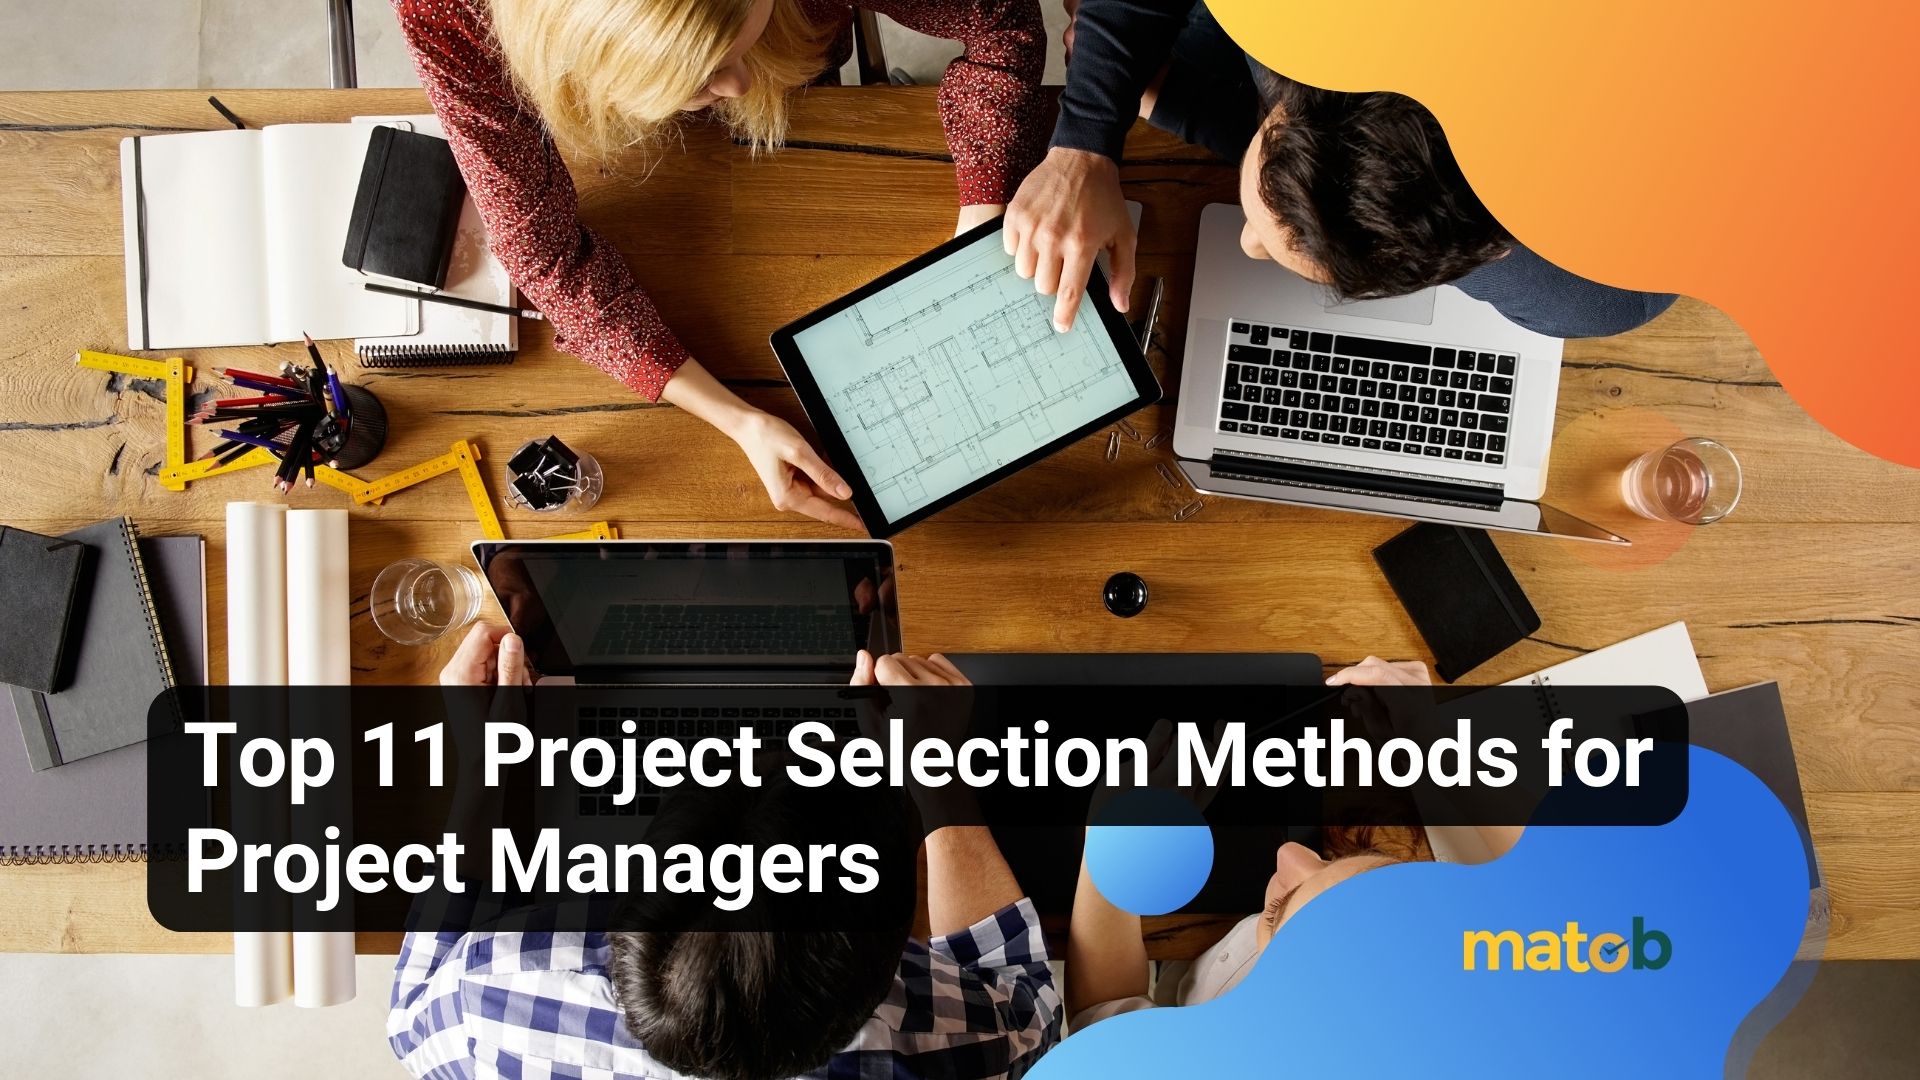 Top 11 Project Selection Methods for Project Managers